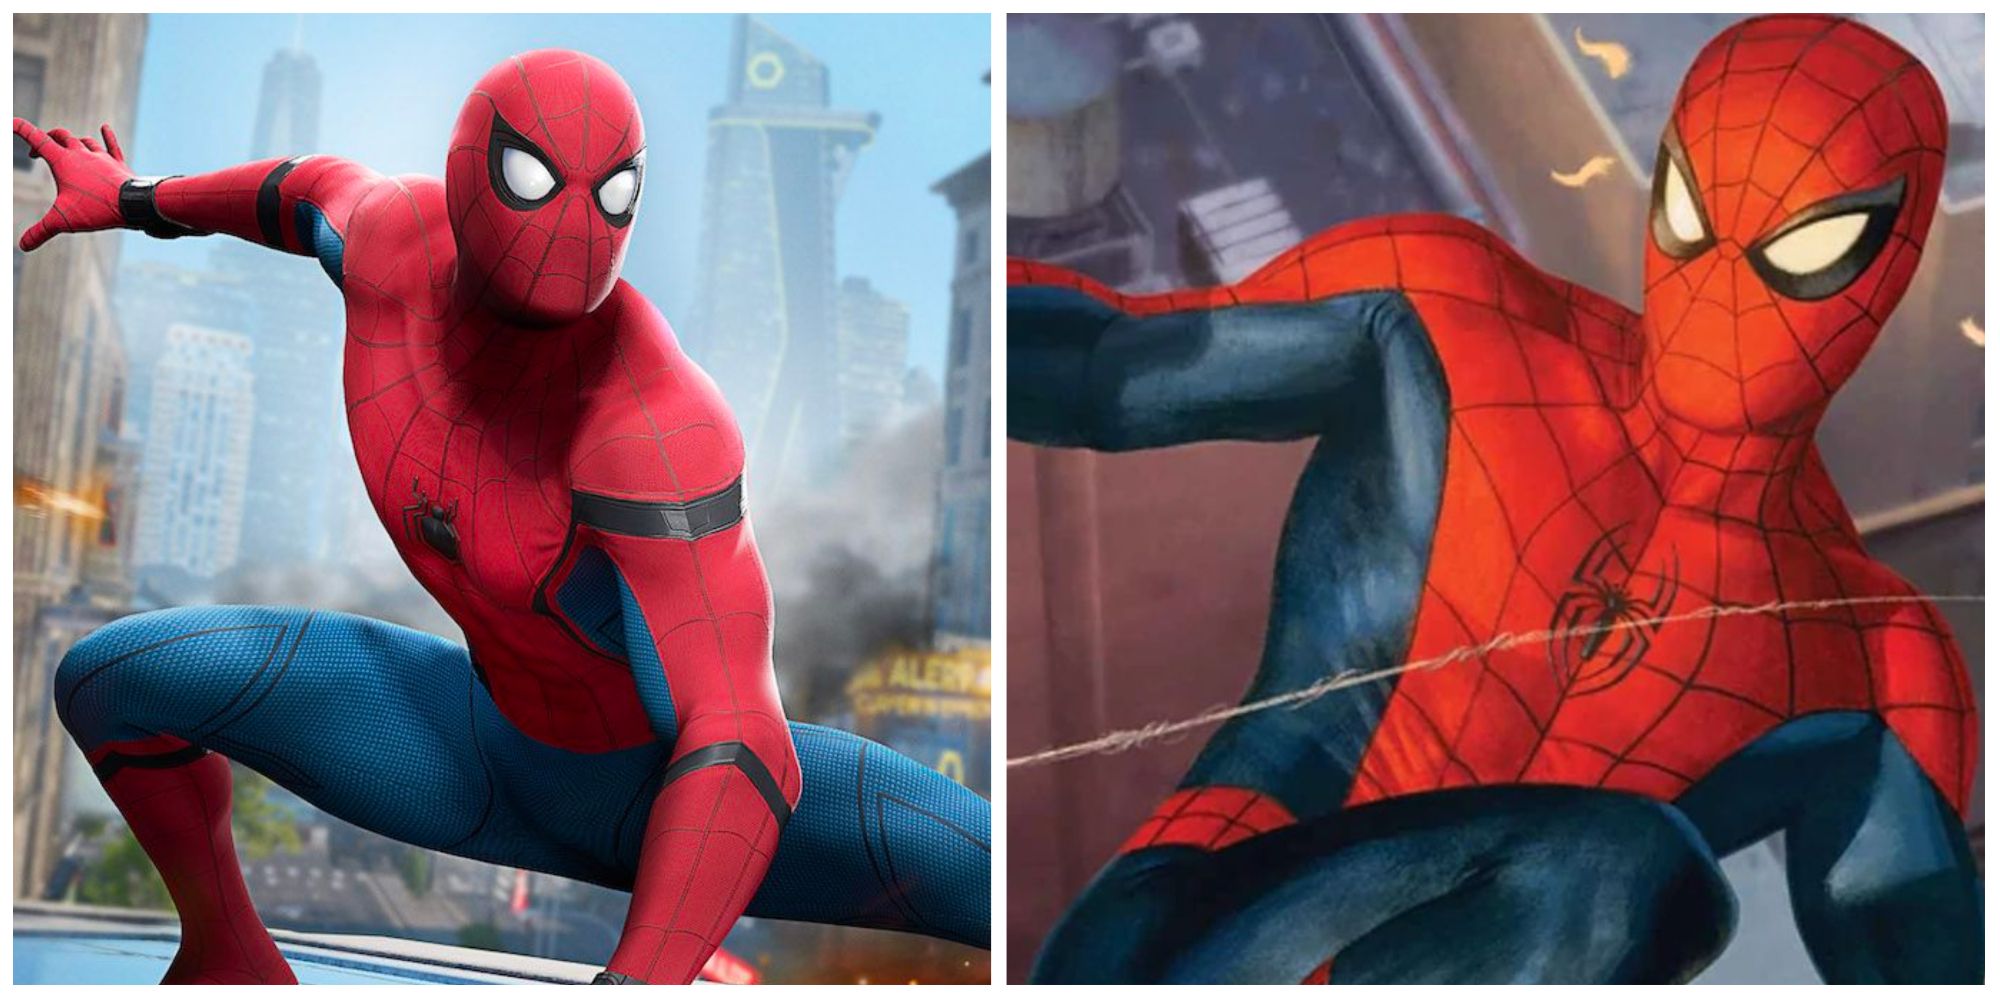 A split image of the MCU's Spider-Man and Peter Parker's Spider-Man in Marvel Comics